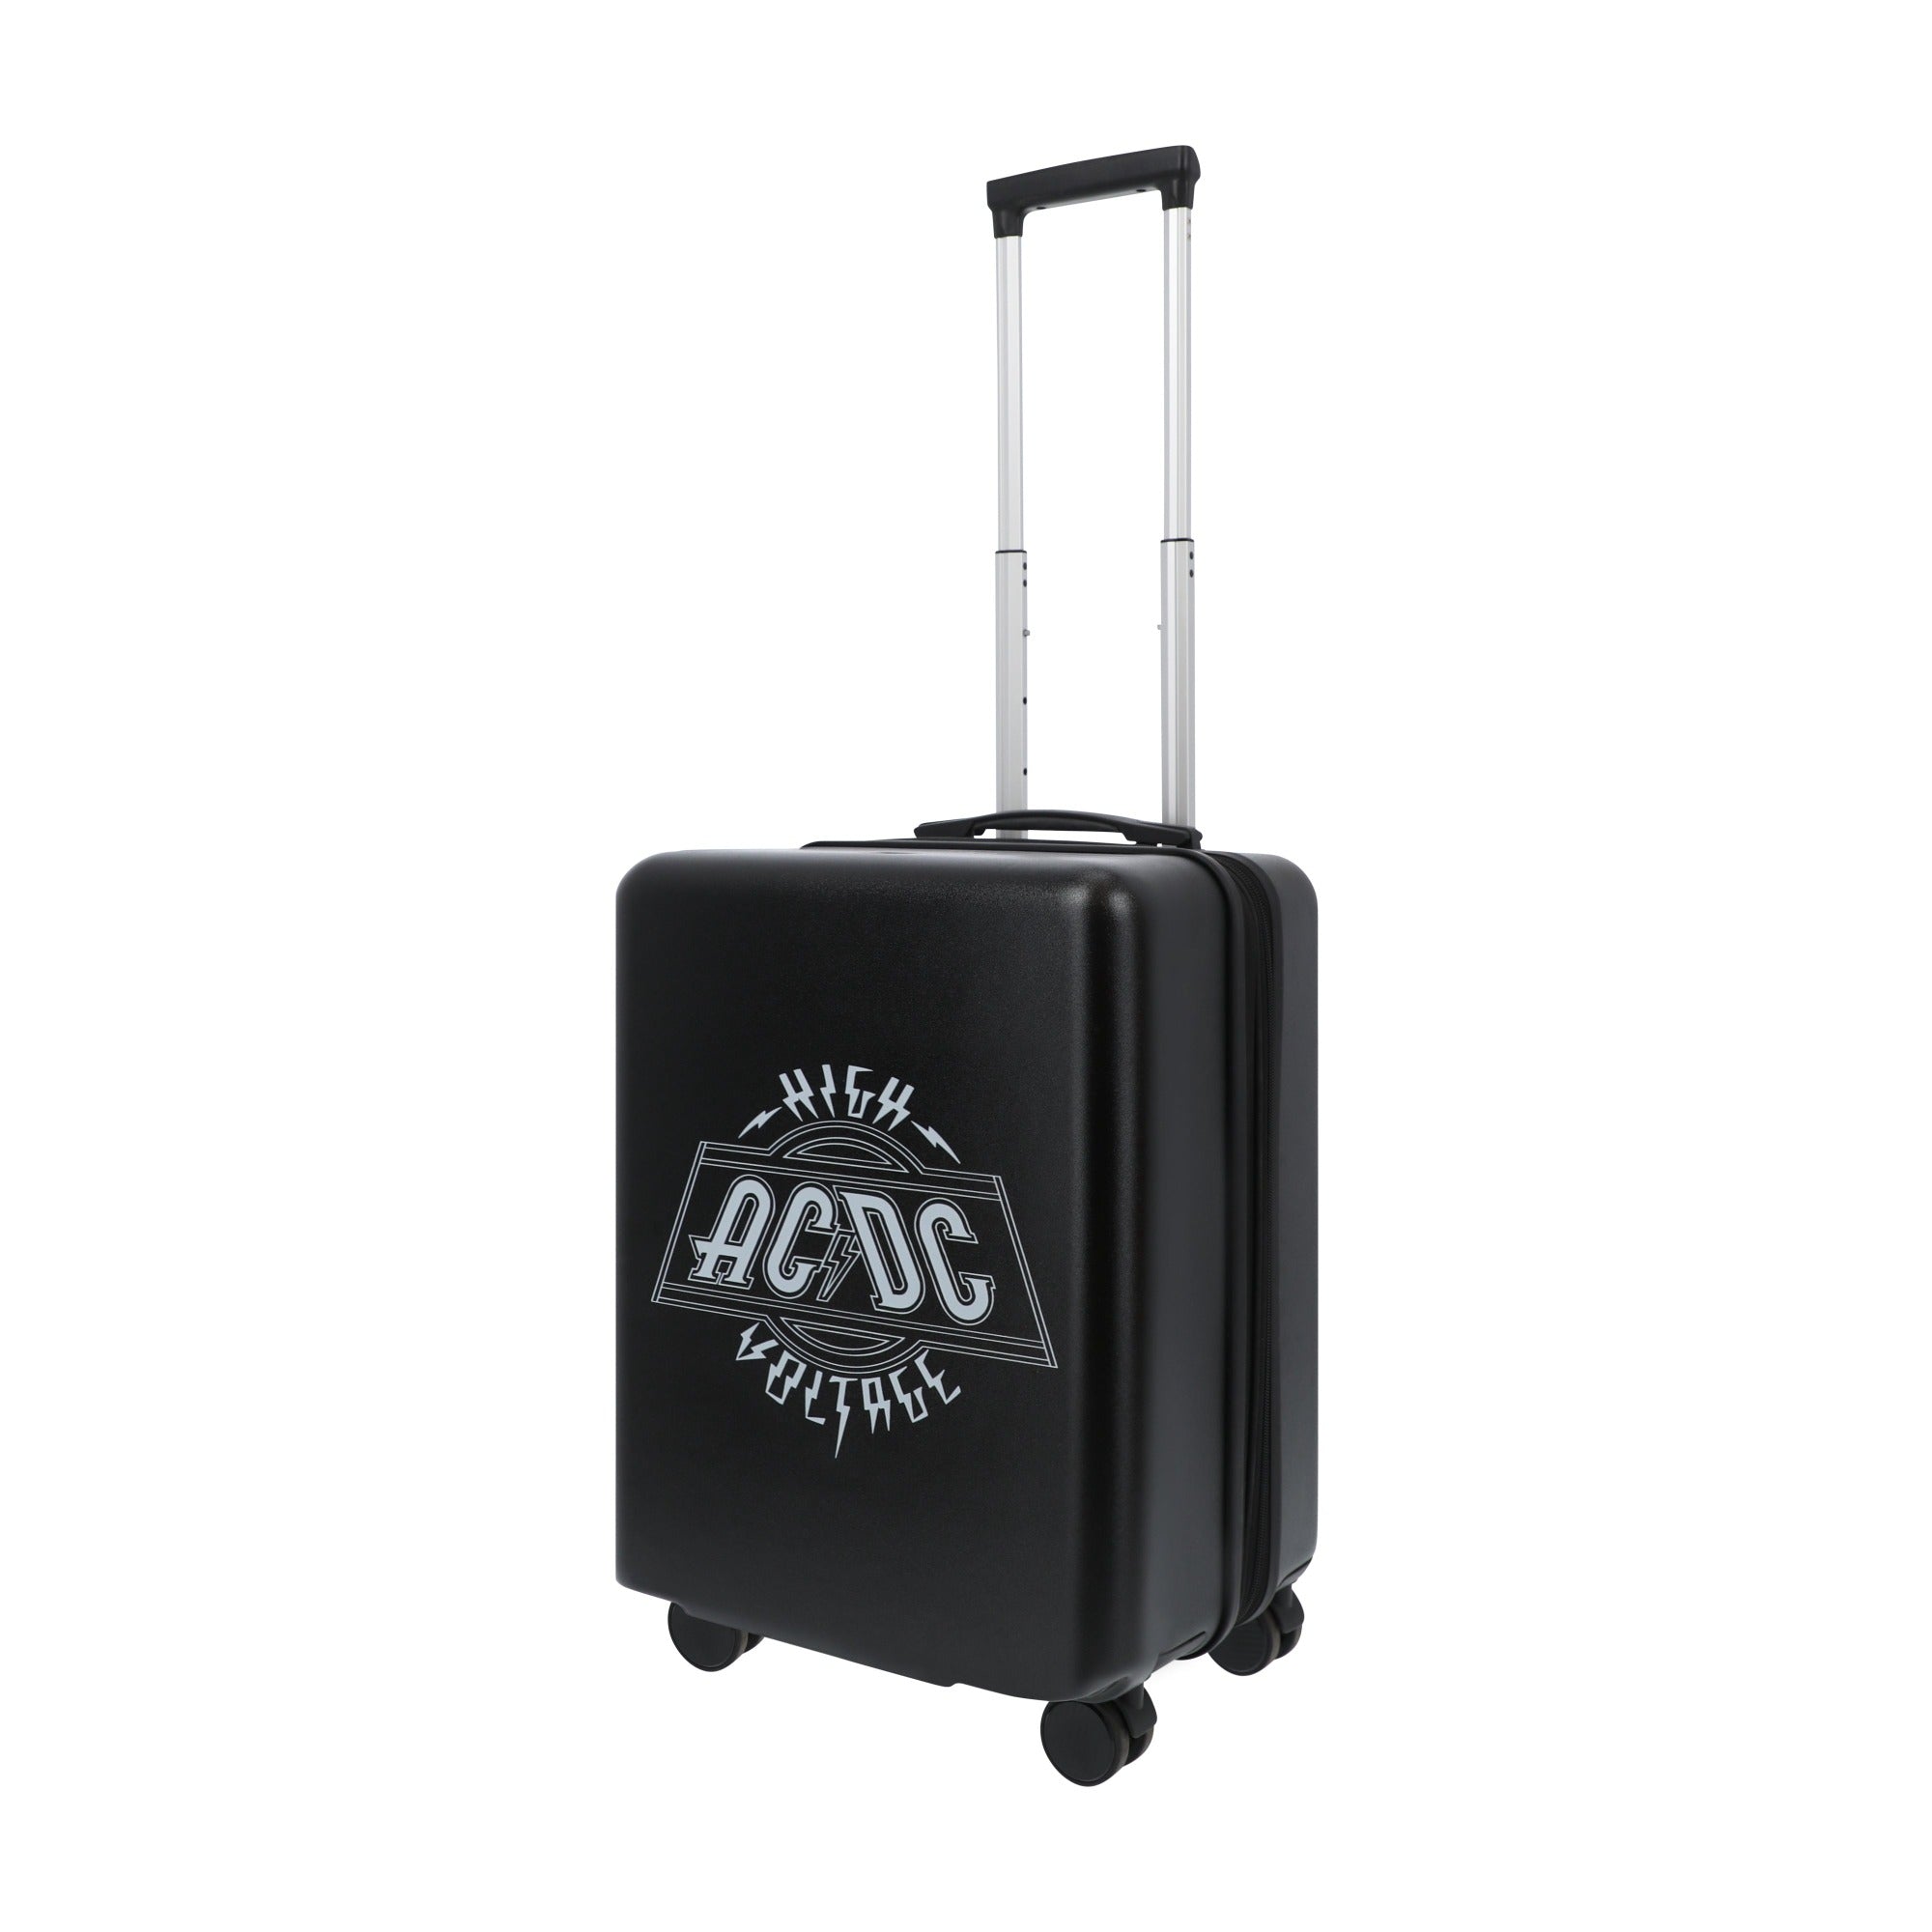 Black AC/DC 22.5" spinner suitcase carry-on luggage hardside by Ful